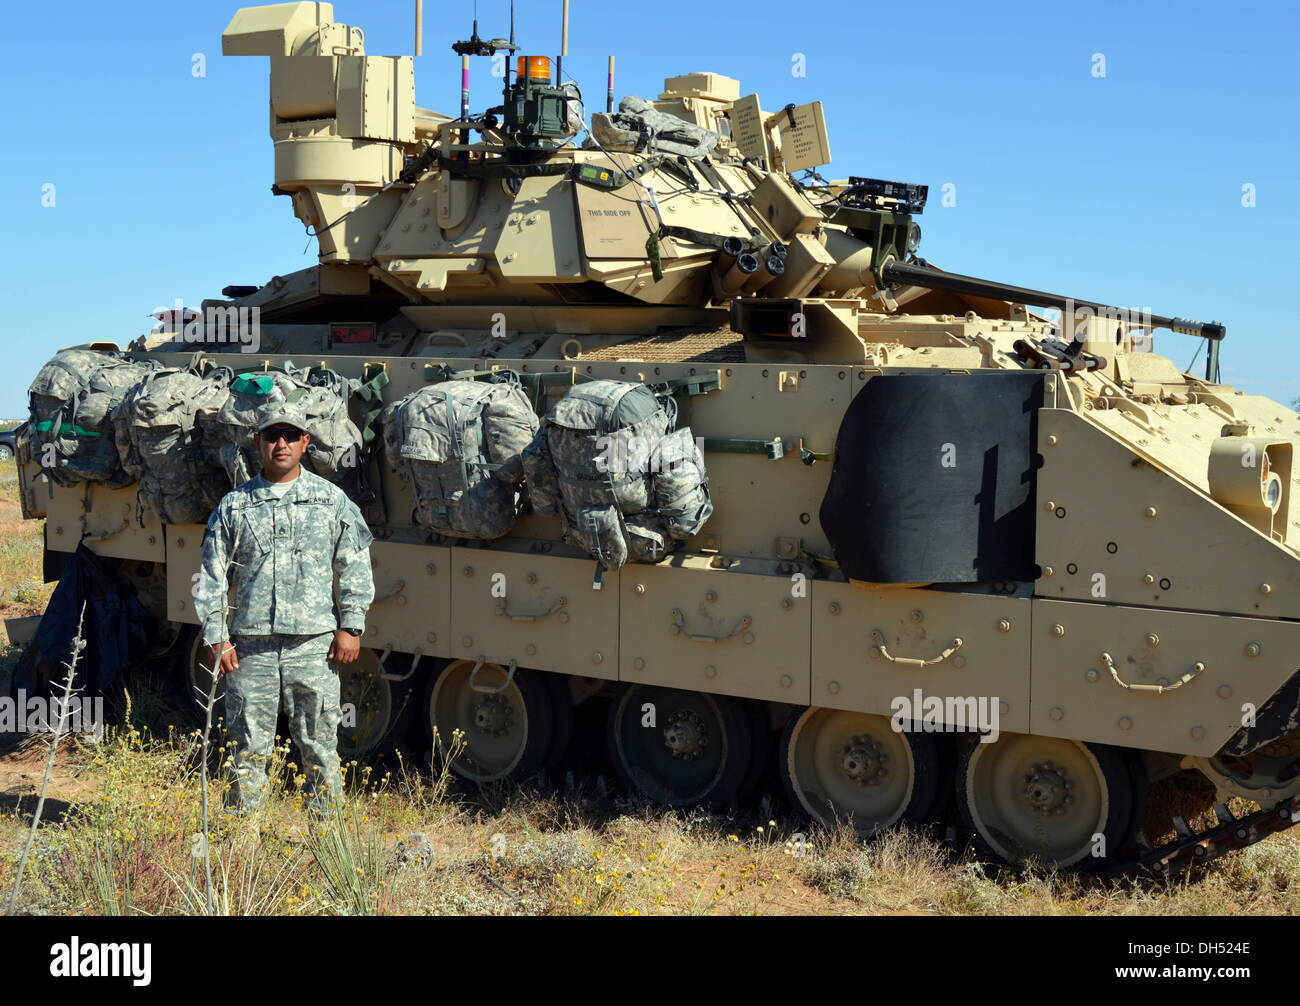 Staff Sgt. Thomas Moran, a section leader in Alpha Company, 1st Battalion, 6th Infantry Regiment, 2nd Brigade, 1st Armored Division, poses with a Bradley infantry fighting vehicle at Fort Bliss, Texas, Oct. 25, 2013. Soldiers at Network Integration Evalua Stock Photo